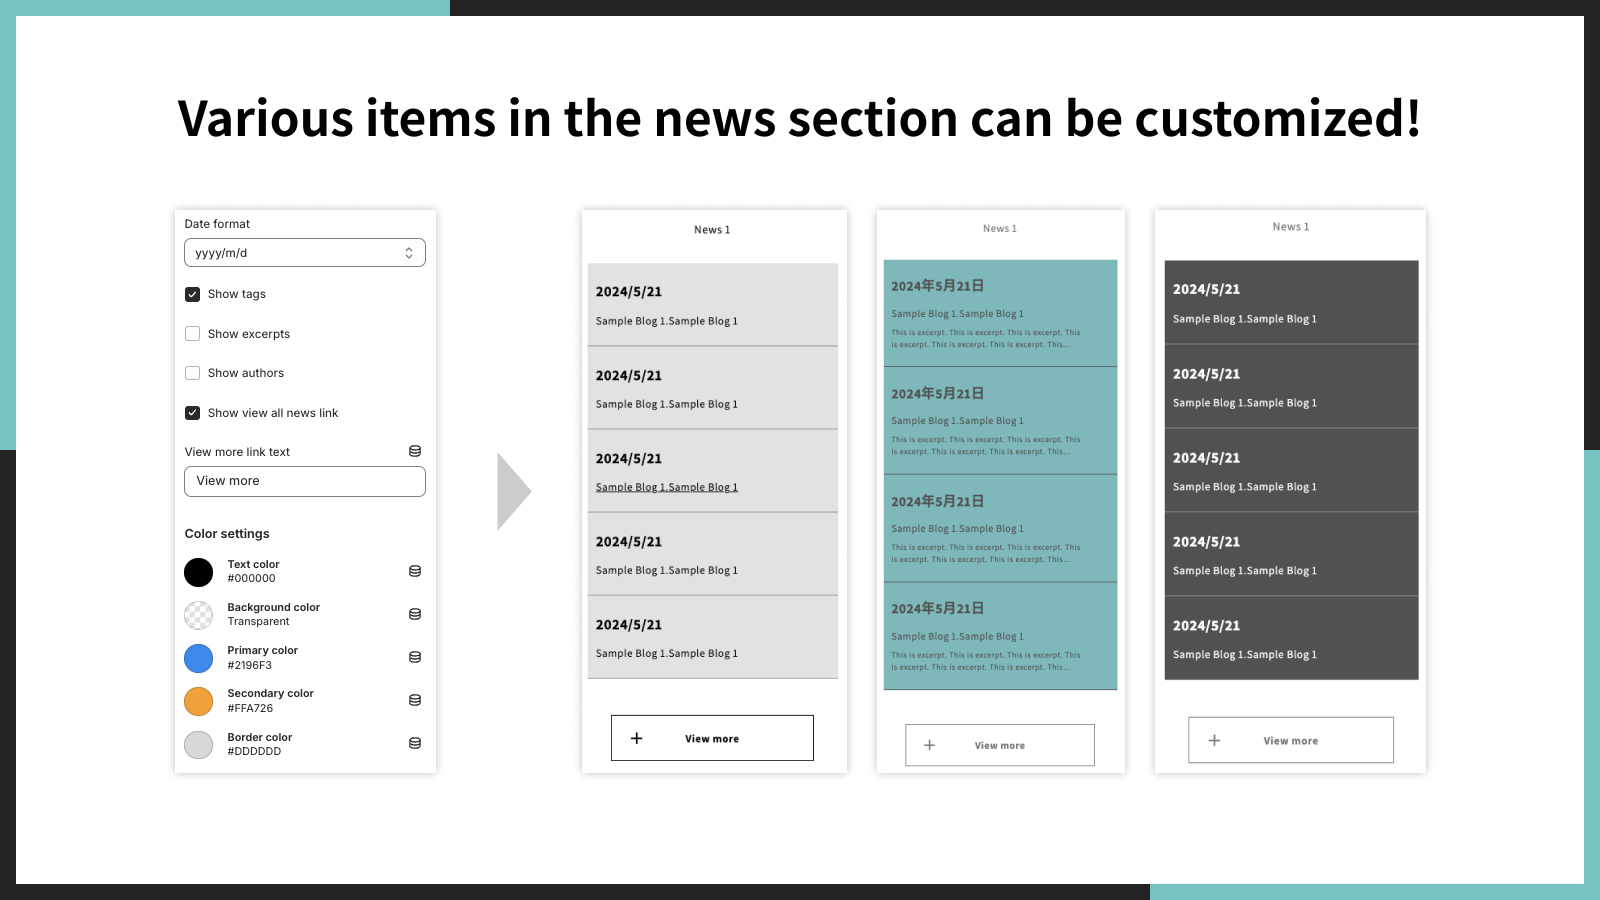 Various items in the News section can be customized.